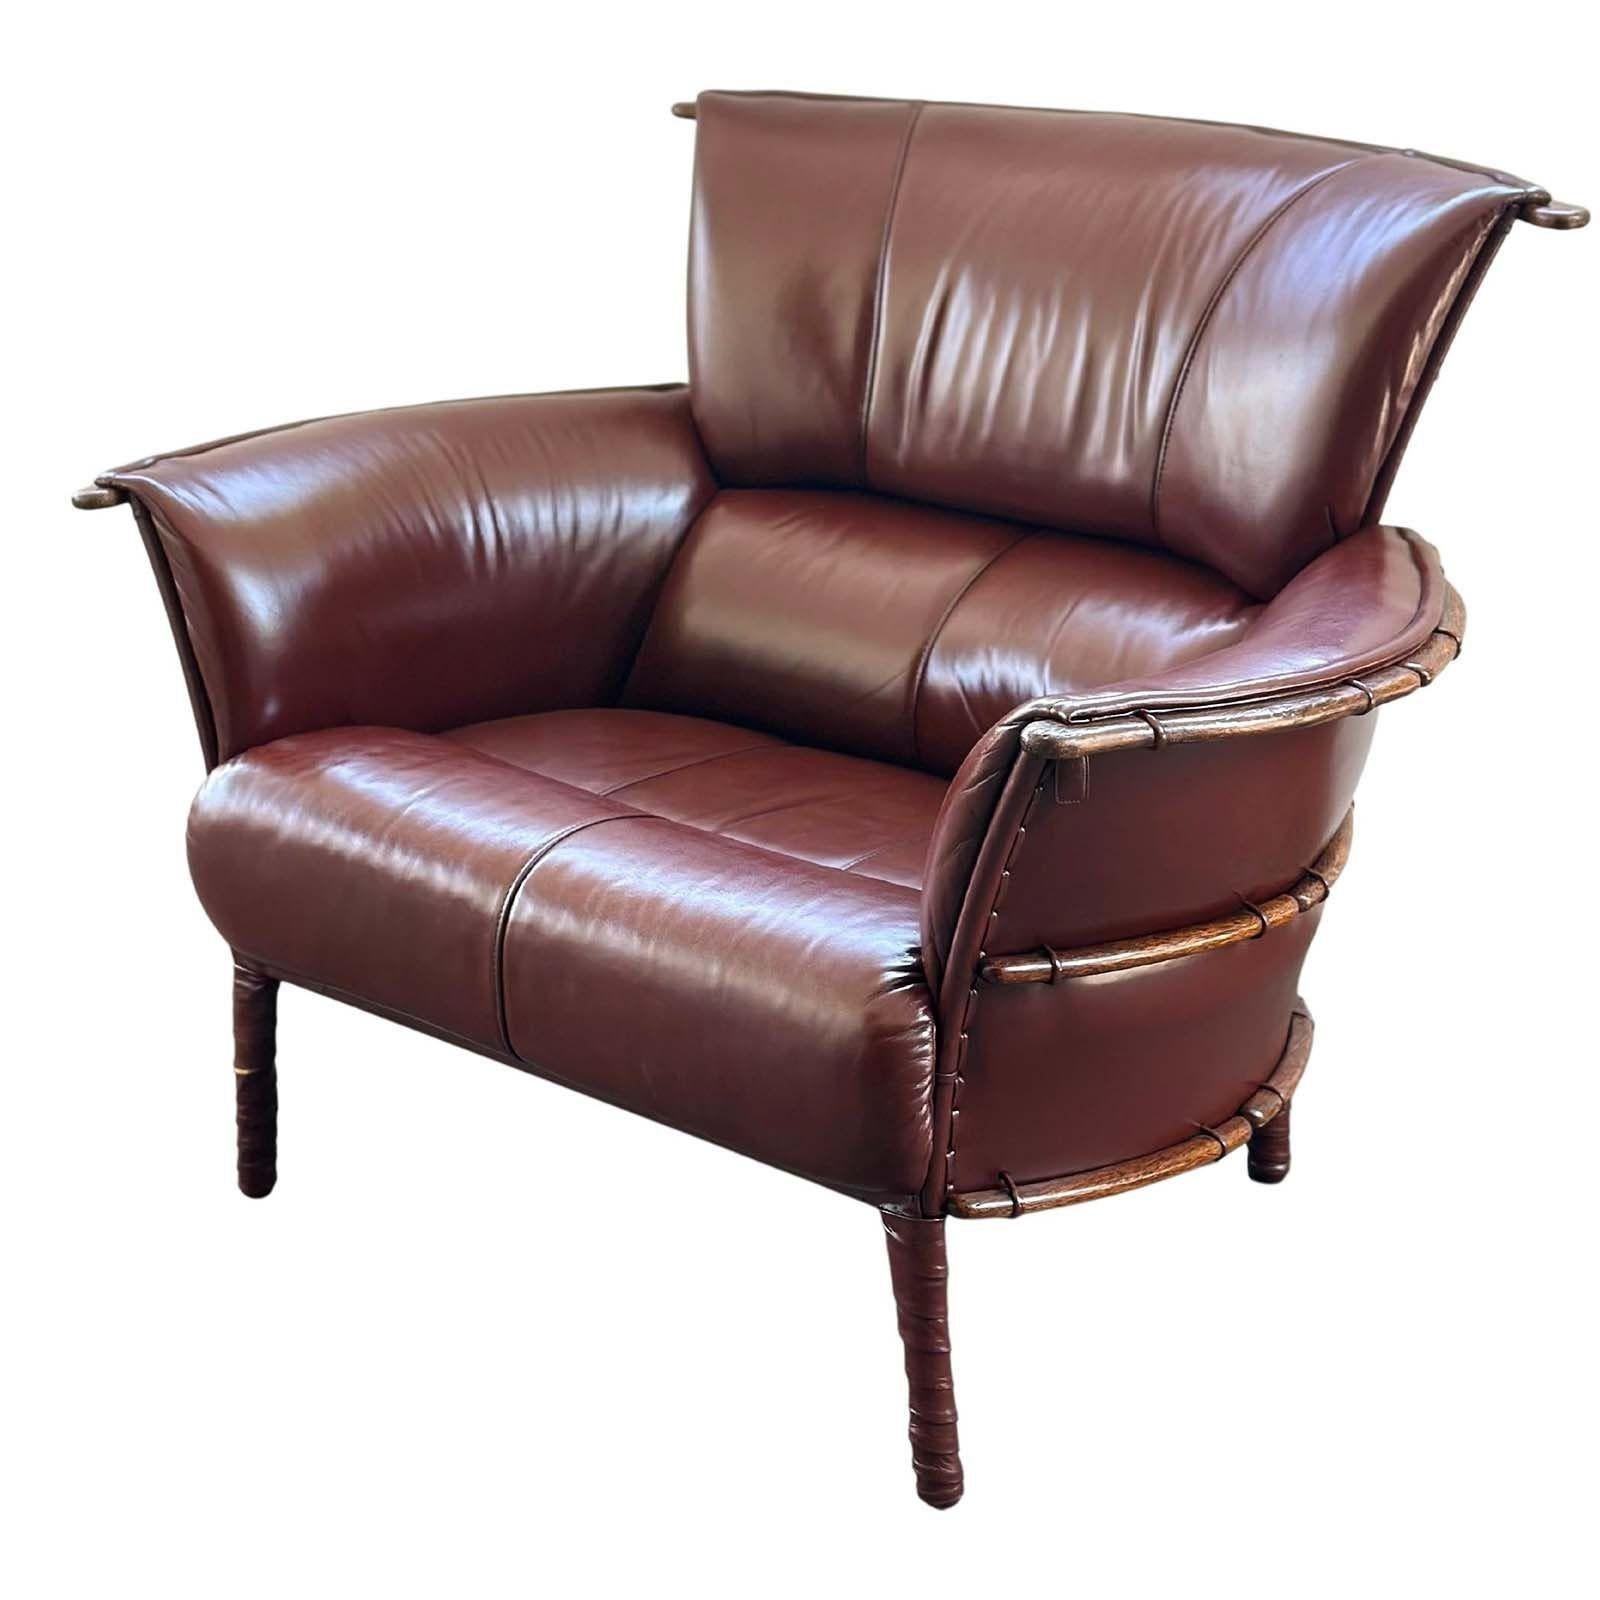 Versatile and stylish set of burgundy leather armchair and ottoman by Pacific Green. The leather has been newly reconditioned and the back of the frame is wrapped around palm wood ribs.
From Pacific Green Website:
